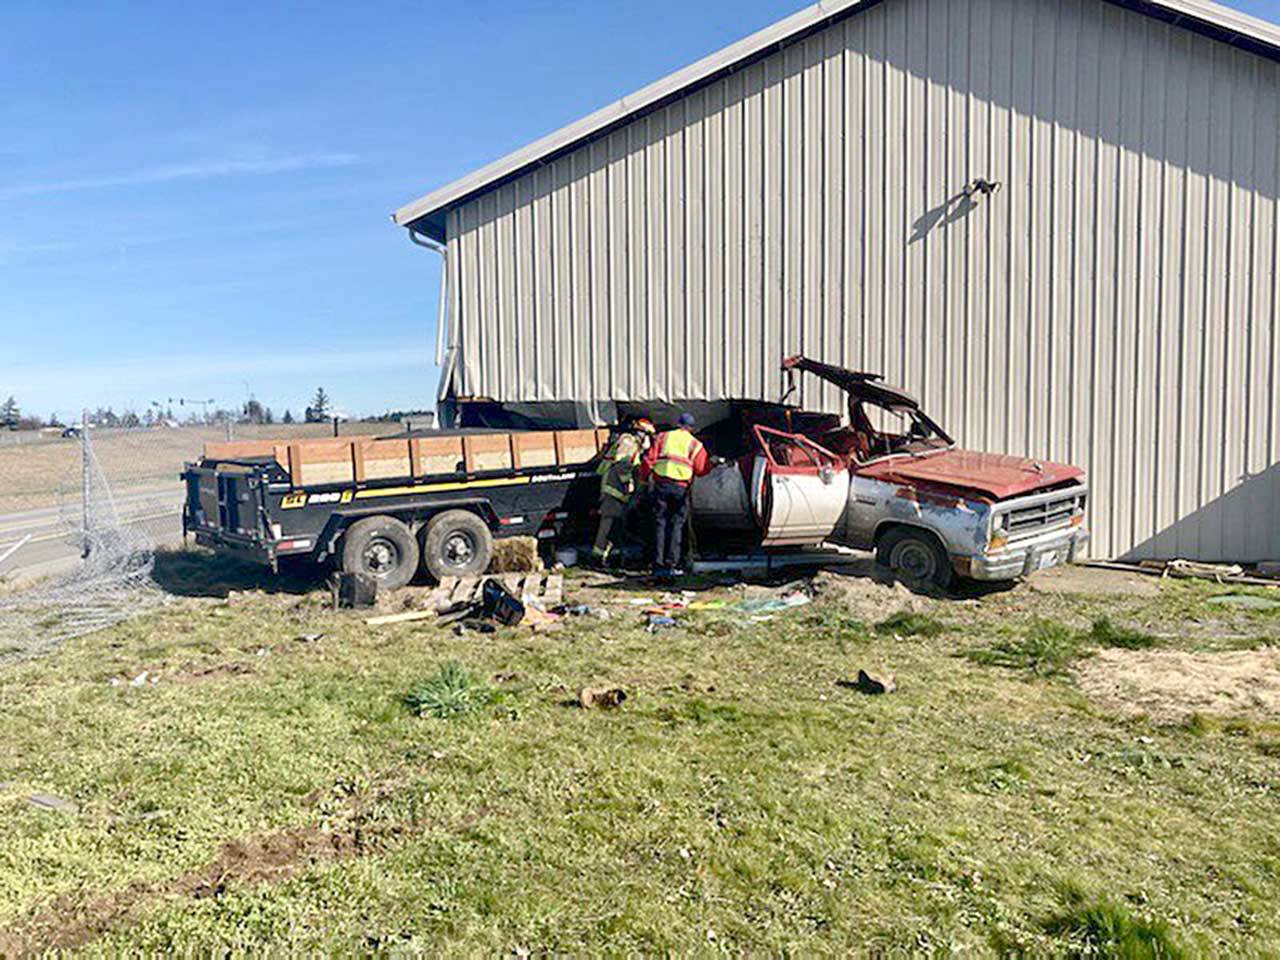 A Port Angeles man was transported to Olympic Medical Center with non-life-threatening injuries after his vehicle reportedly drifted off U.S. Highway 101 and into a building near River Road in Sequim. (Photo courtesy of Washington State Patrol)